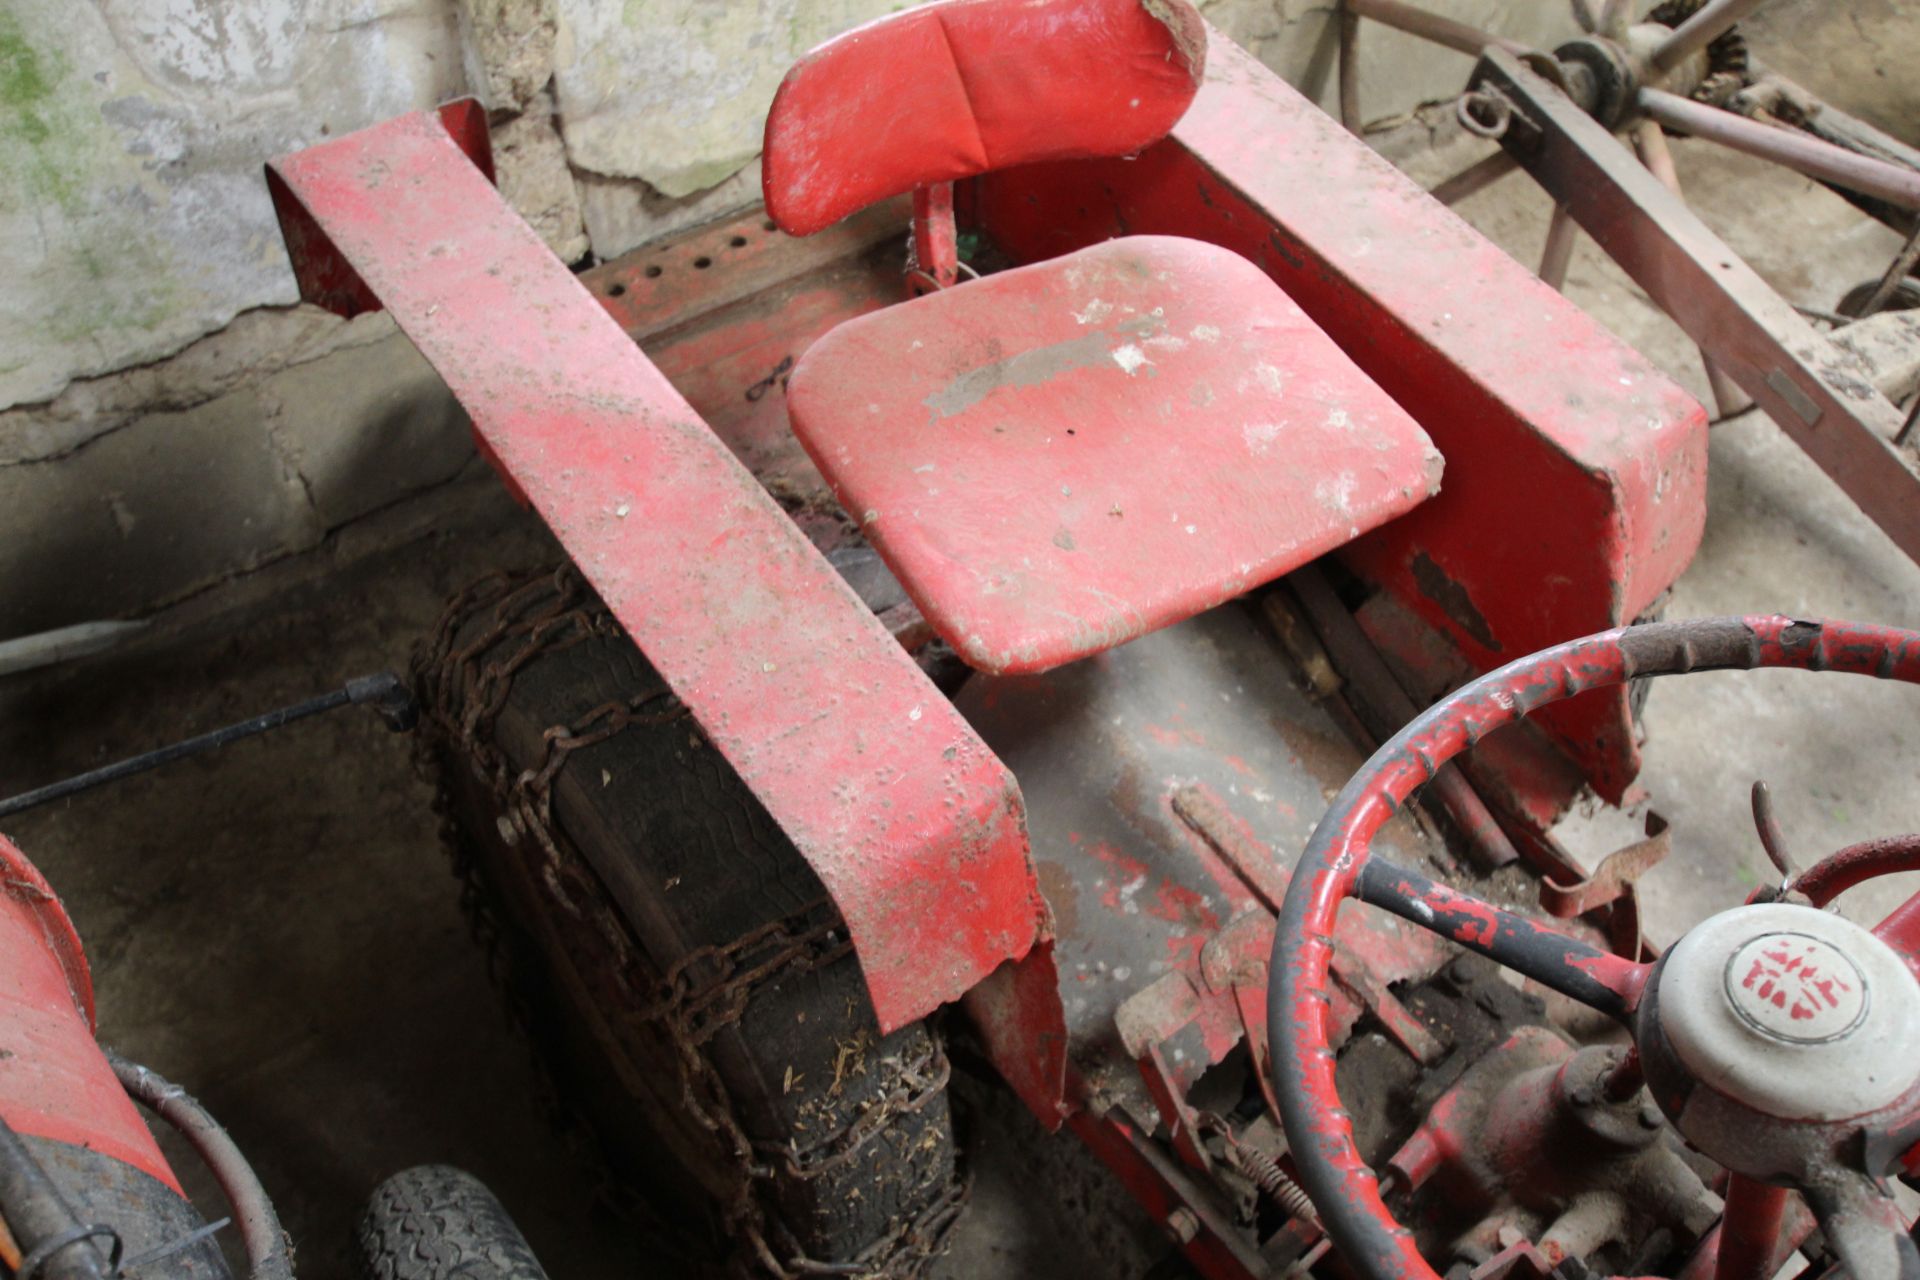 Farm made garden tractor. With Villiers petrol eng - Image 12 of 17